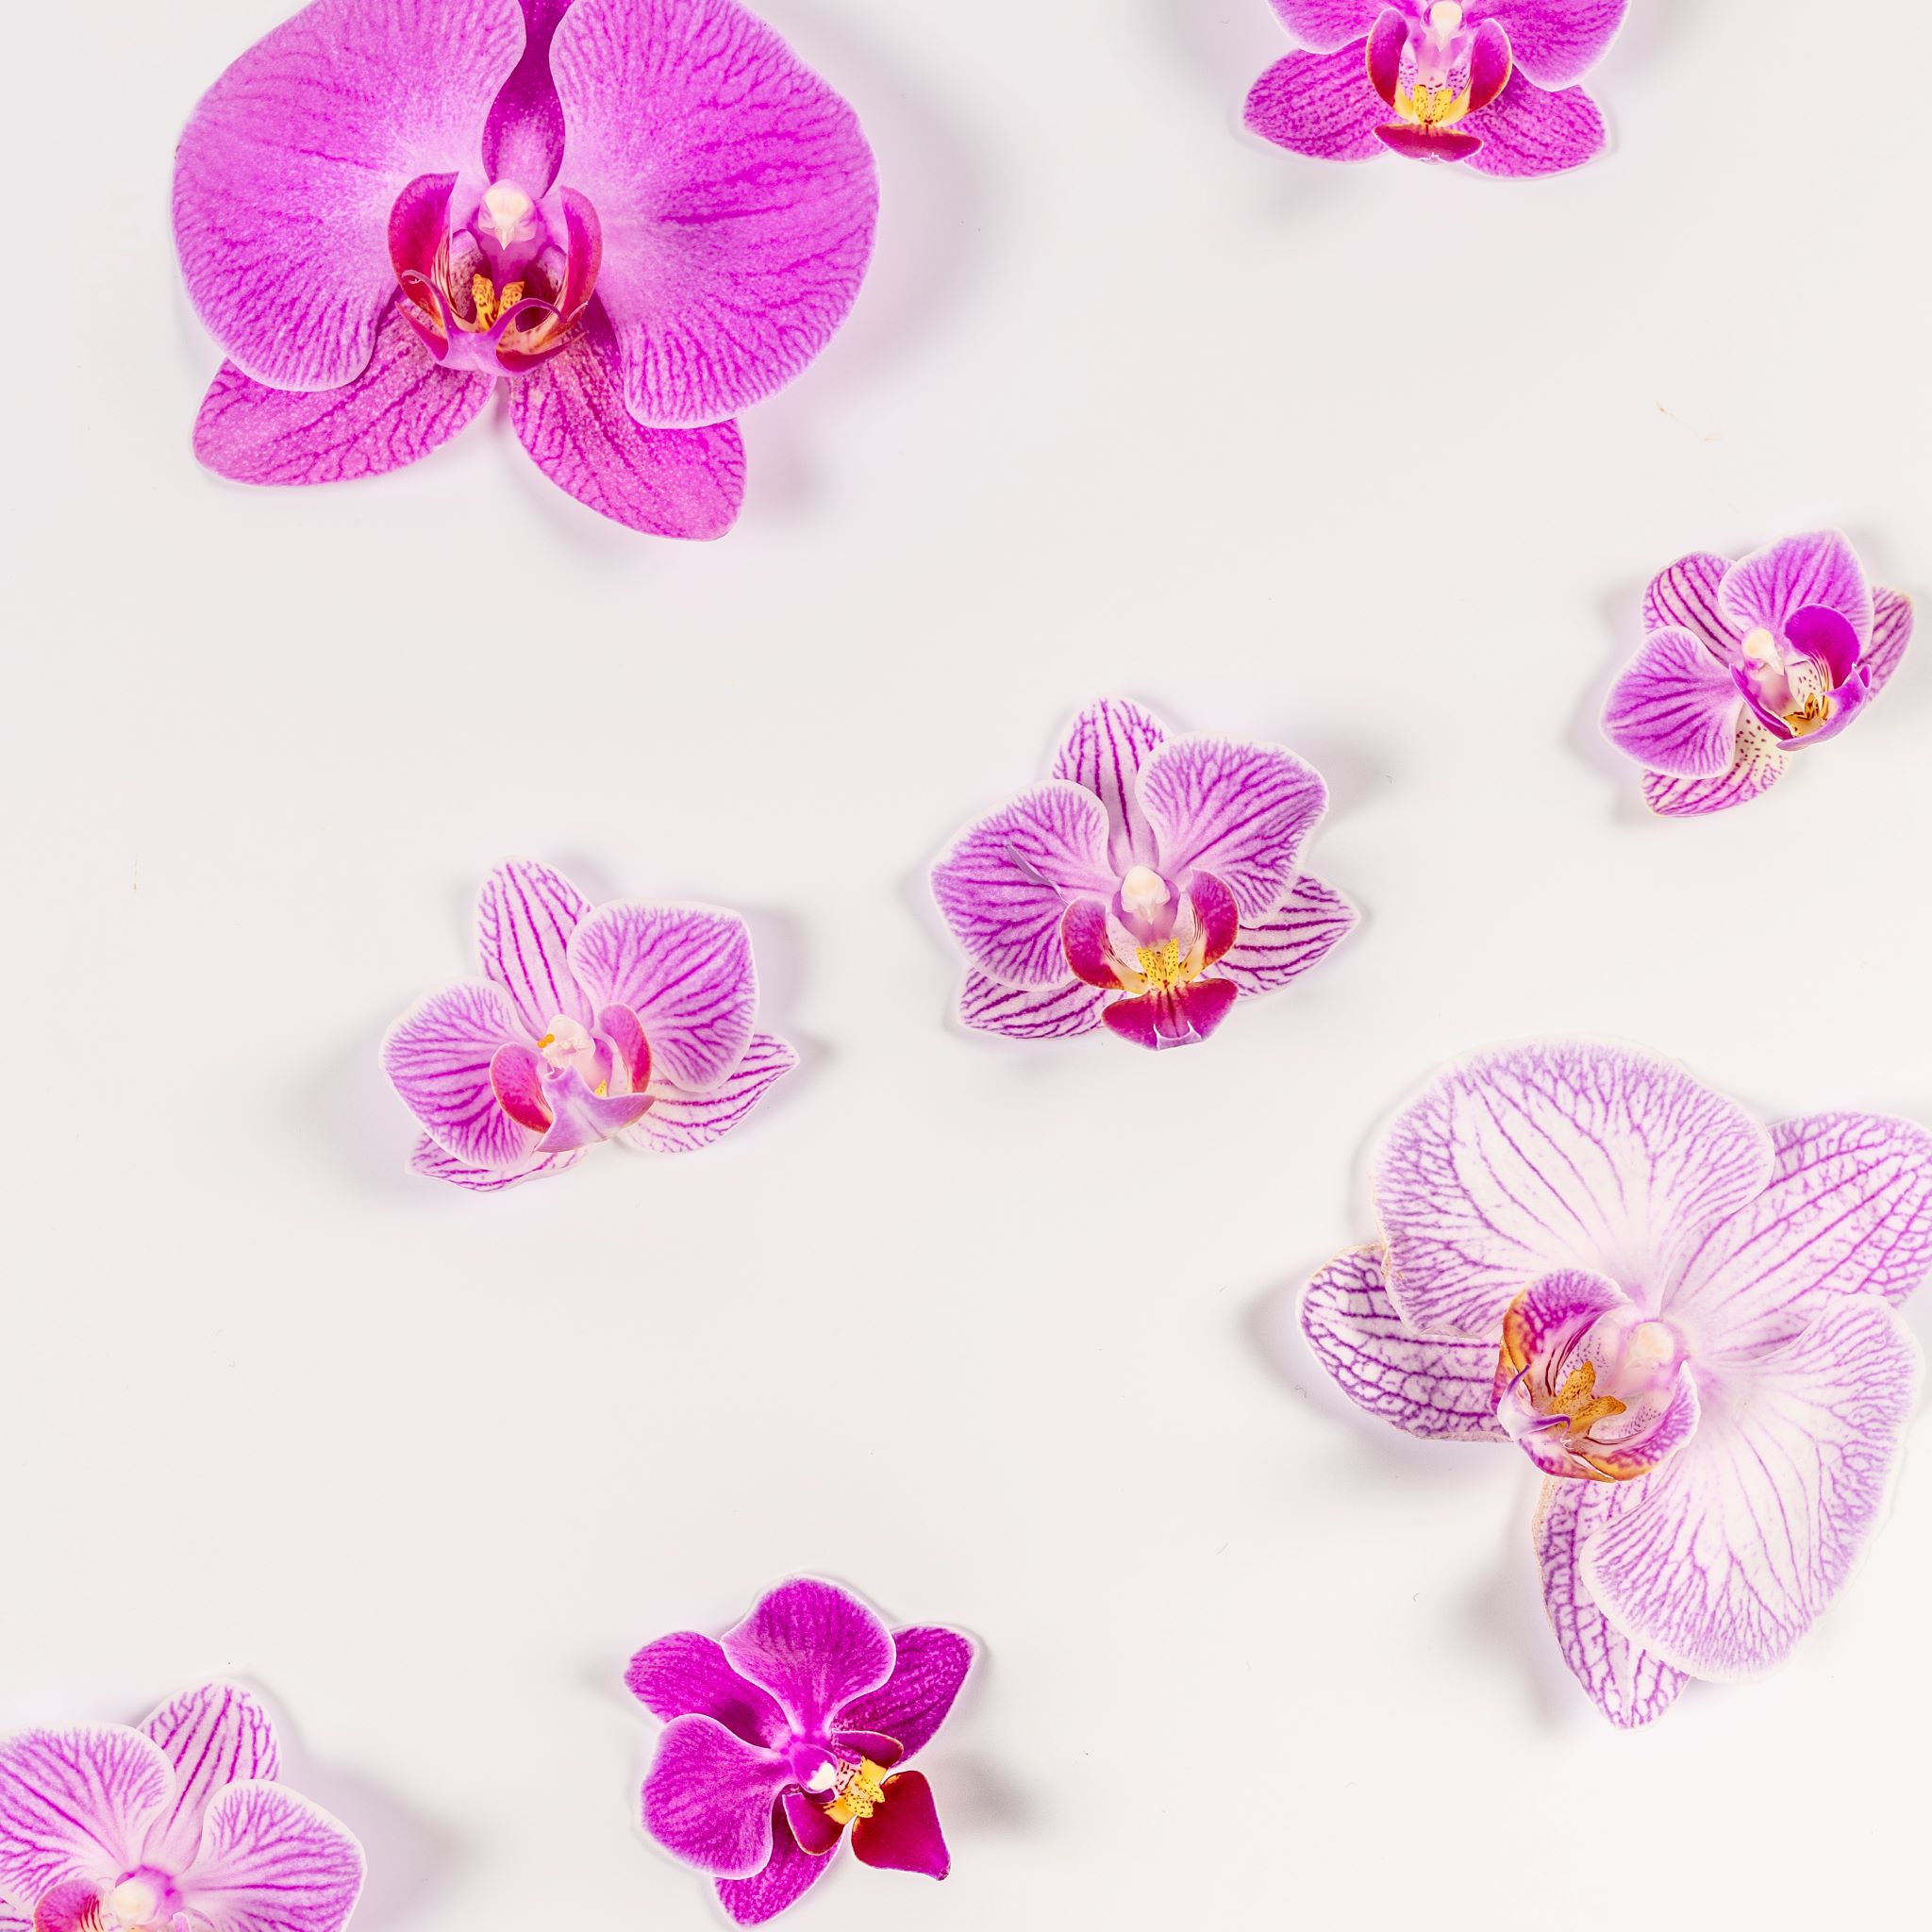 Love Orchids On Twitter: 